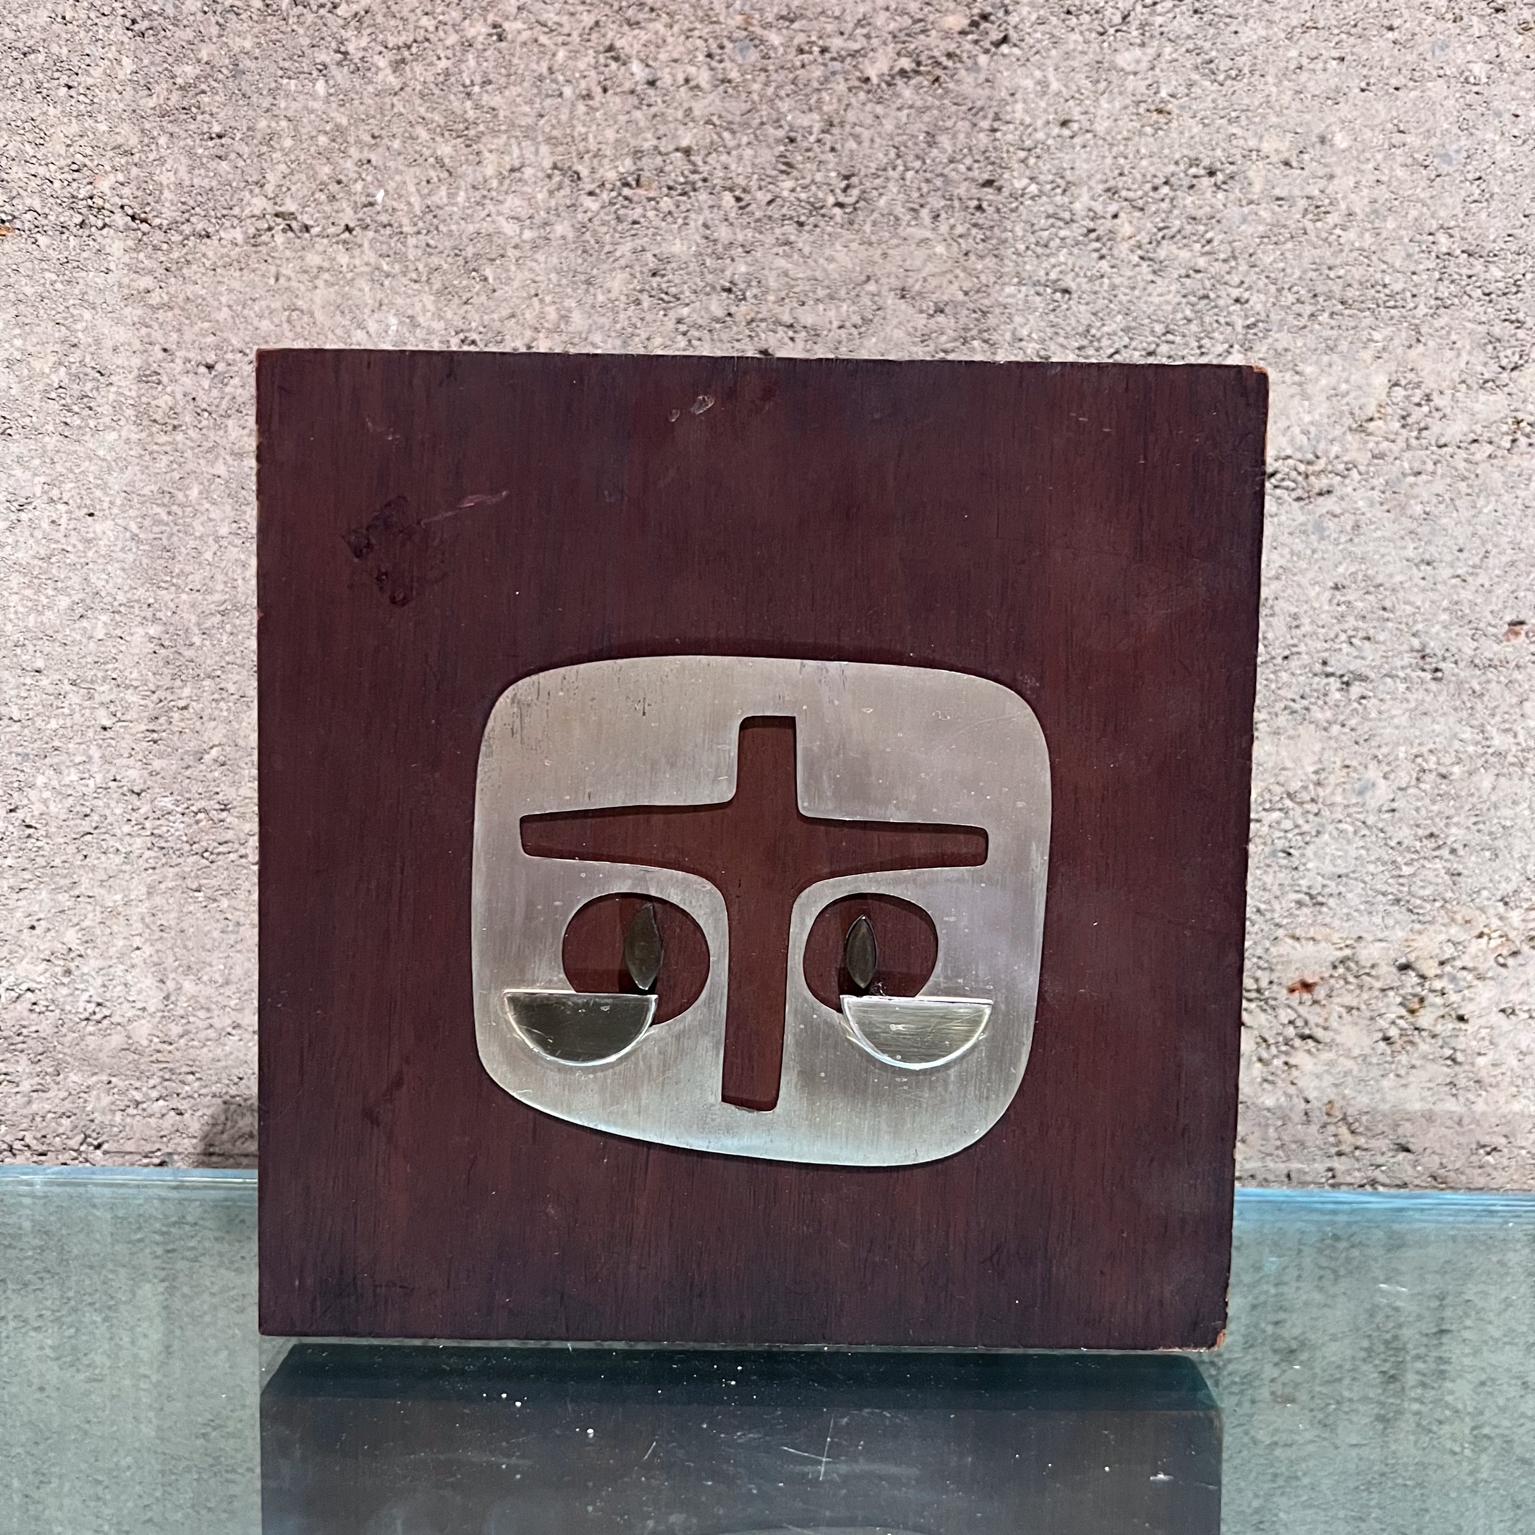 1970s Abstract Wall Art Plaque by Emaus Benedictine Monks of Cuernavaca, Mexico
Maker stamped
8 w x 8 h x 1 d
Handmade solid mahogany wood and Sterling Silver.
Original unrestored vintage preowned condition.
See images please.